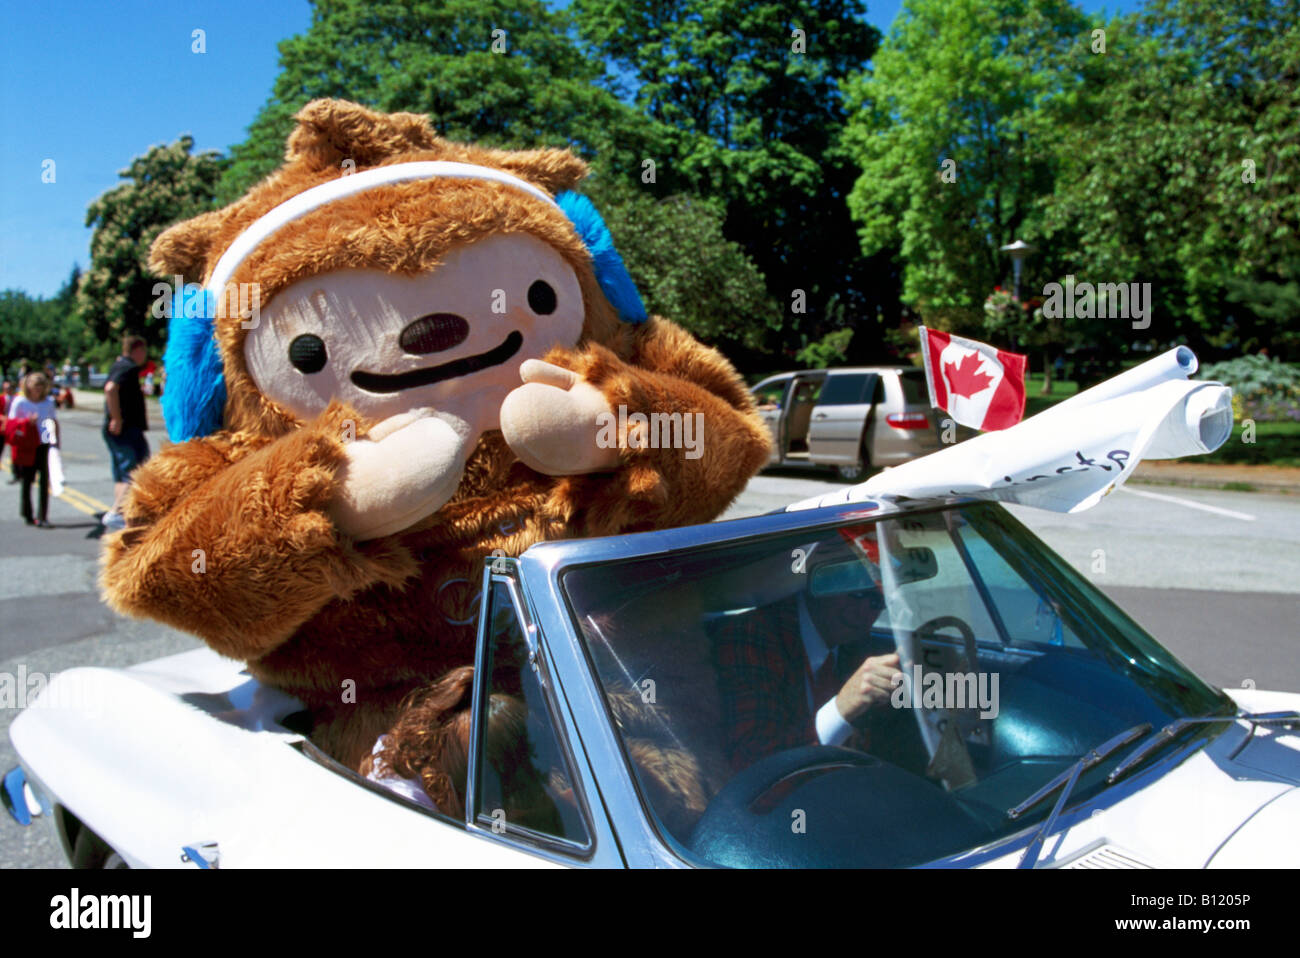 Quatchi - Mascot for 2010 Olympic and Paralympic Winter Games - in Hyack Parade, New Westminster, BC, British Columbia, Canada Stock Photo